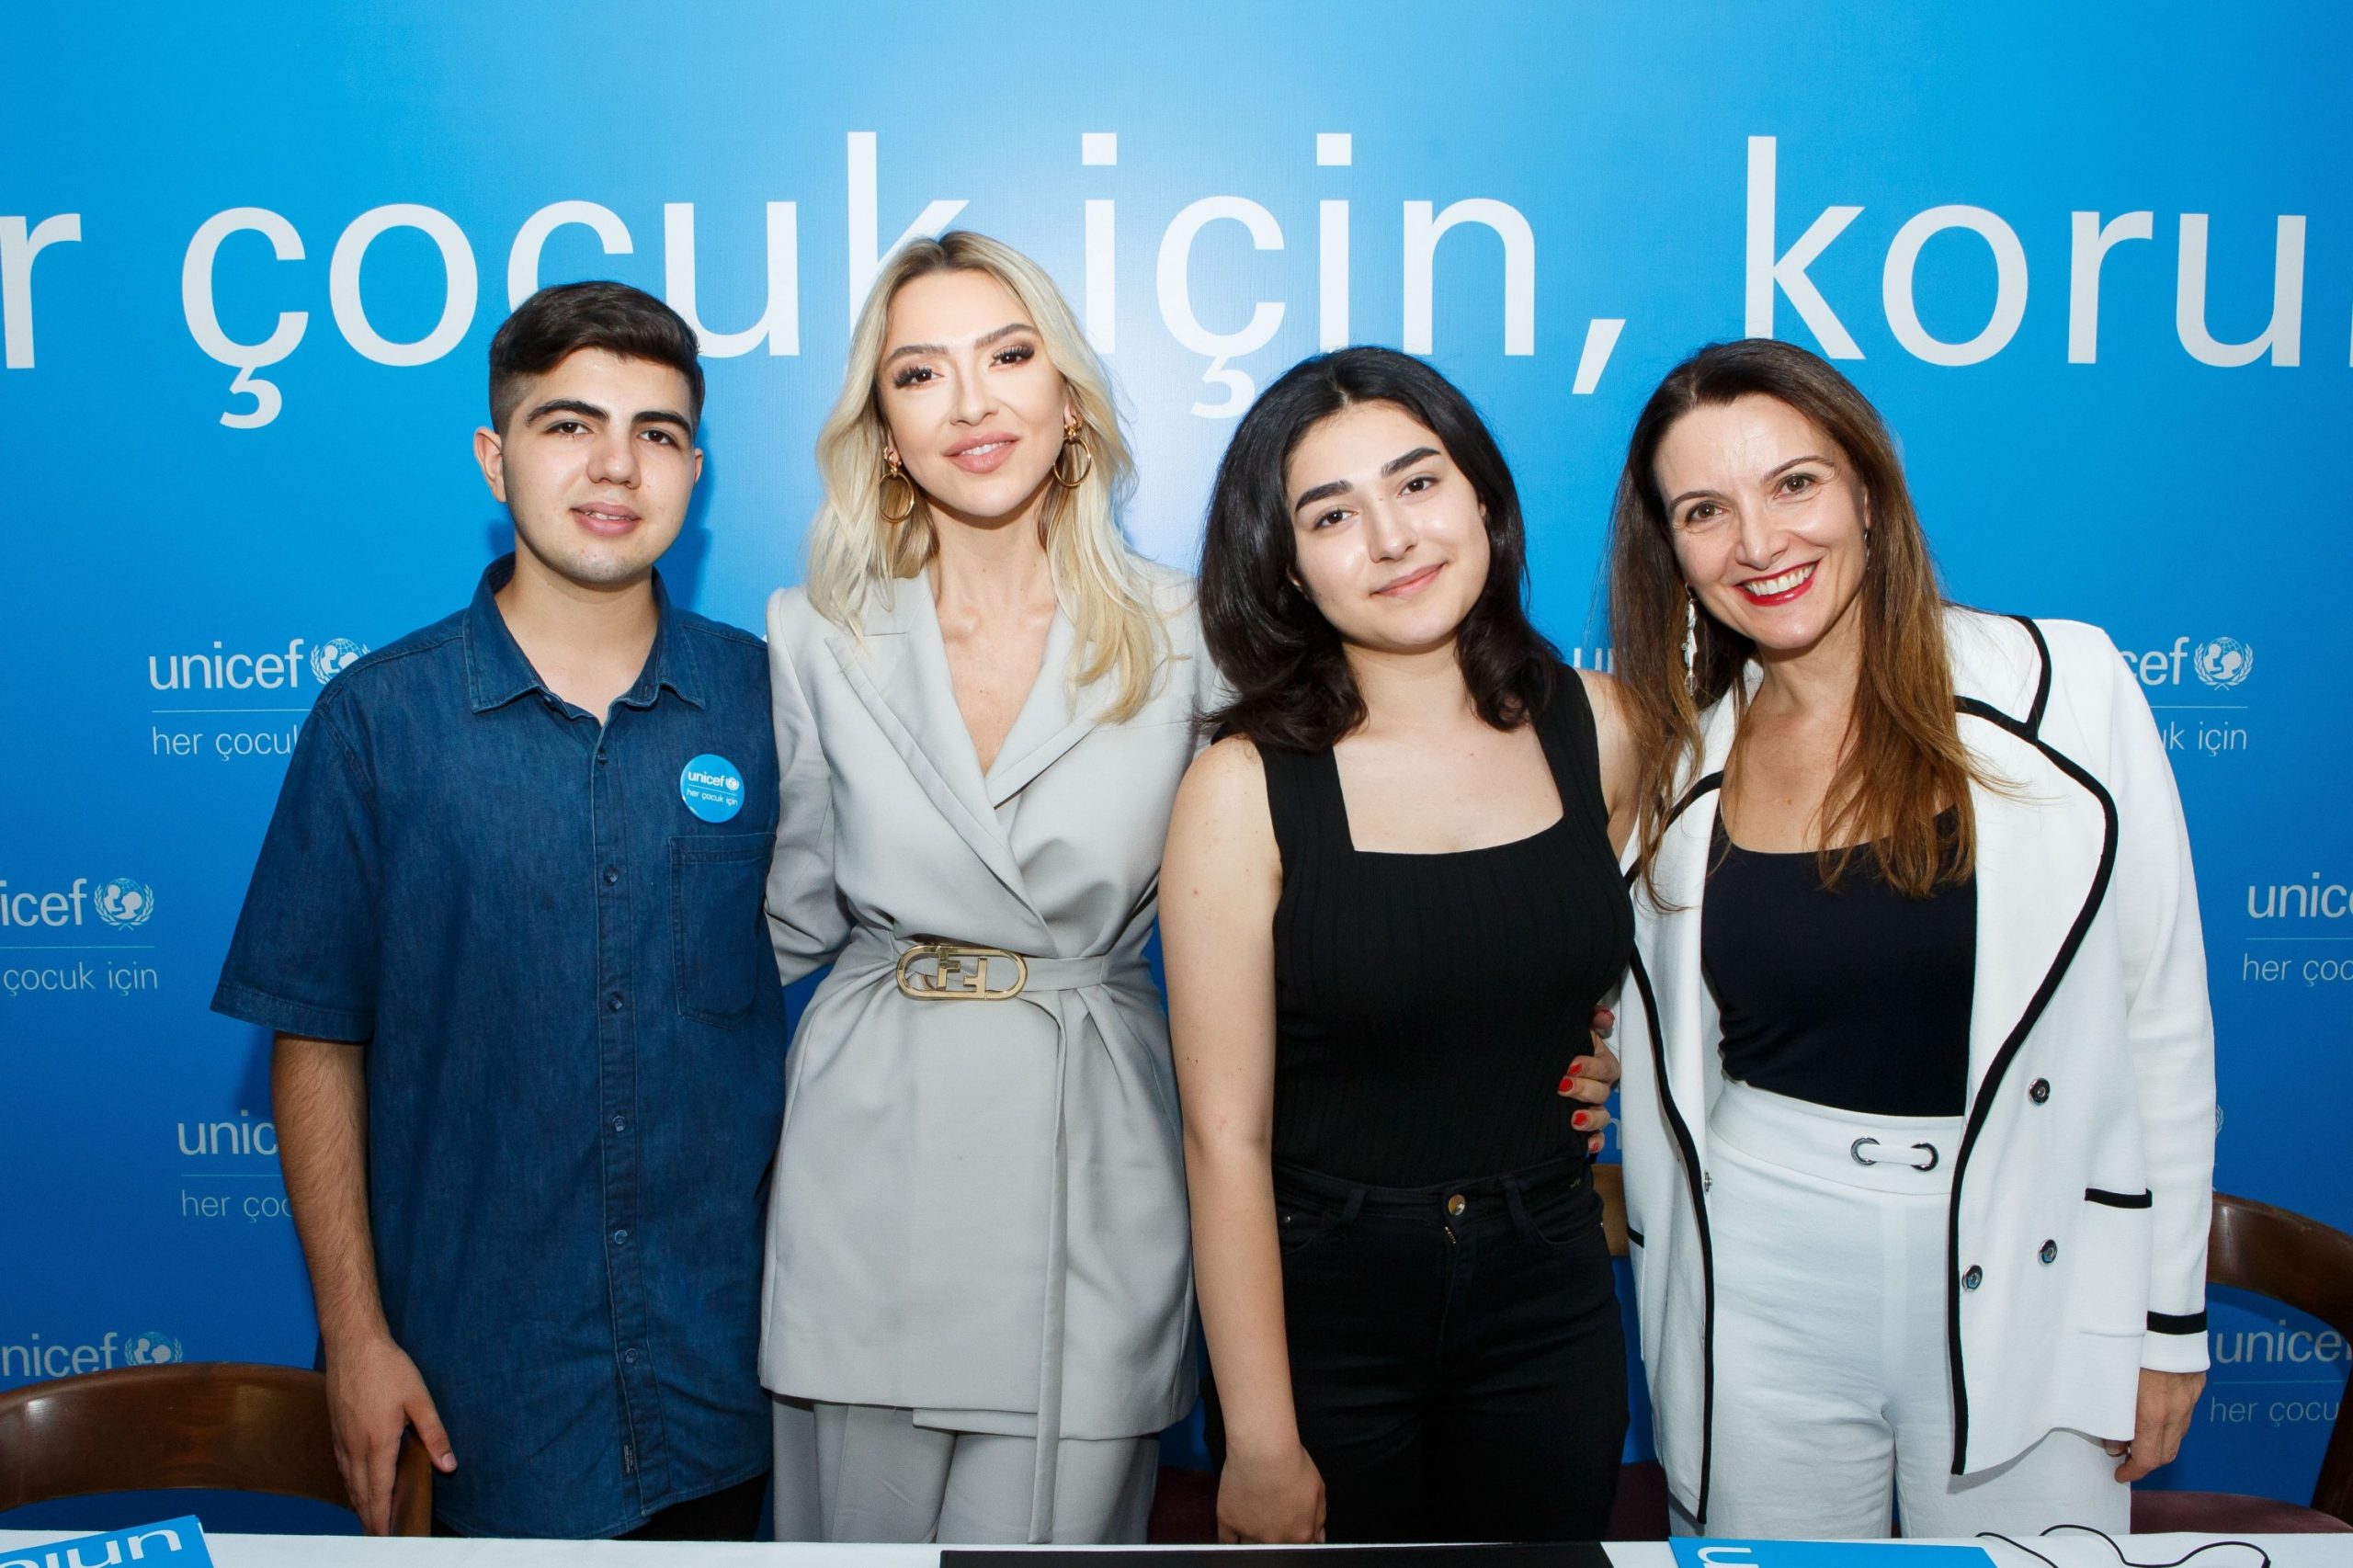 UNICEF Türkiye appointed Hadise to be their newest Child Rights Advocate